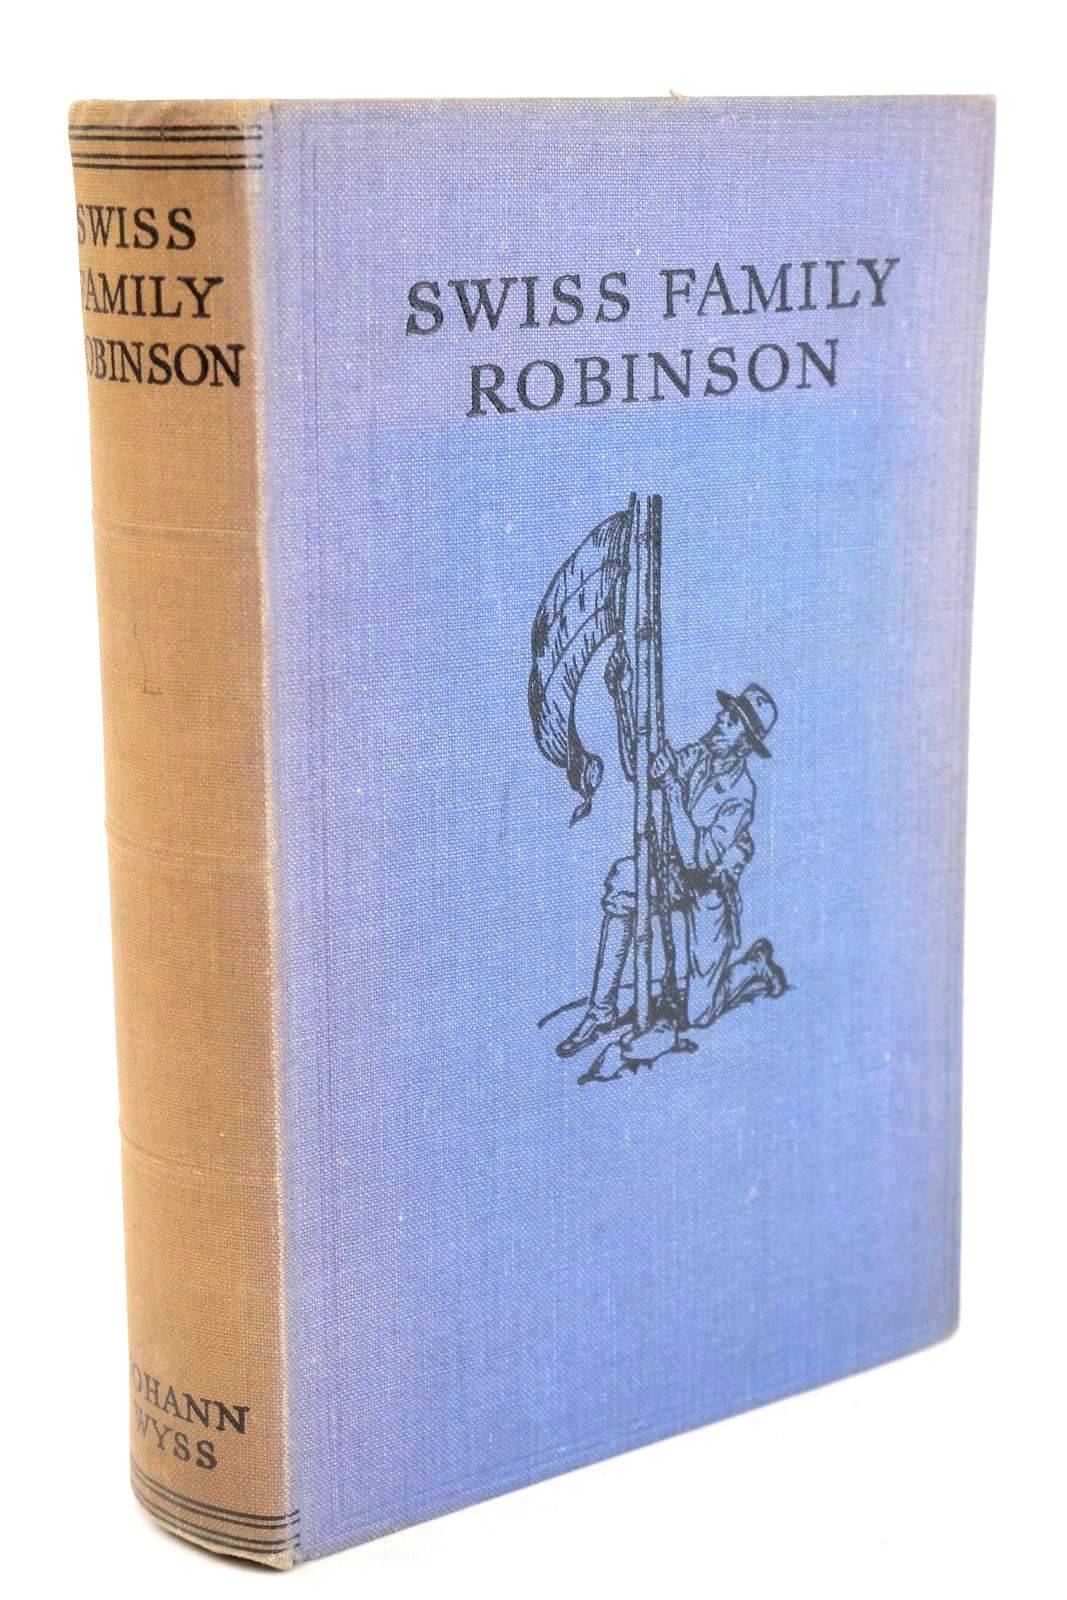 Photo of THE SWISS FAMILY ROBINSON written by Wyss, Johann published by William Clowes &amp; Sons Ltd. (STOCK CODE: 1324600)  for sale by Stella & Rose's Books